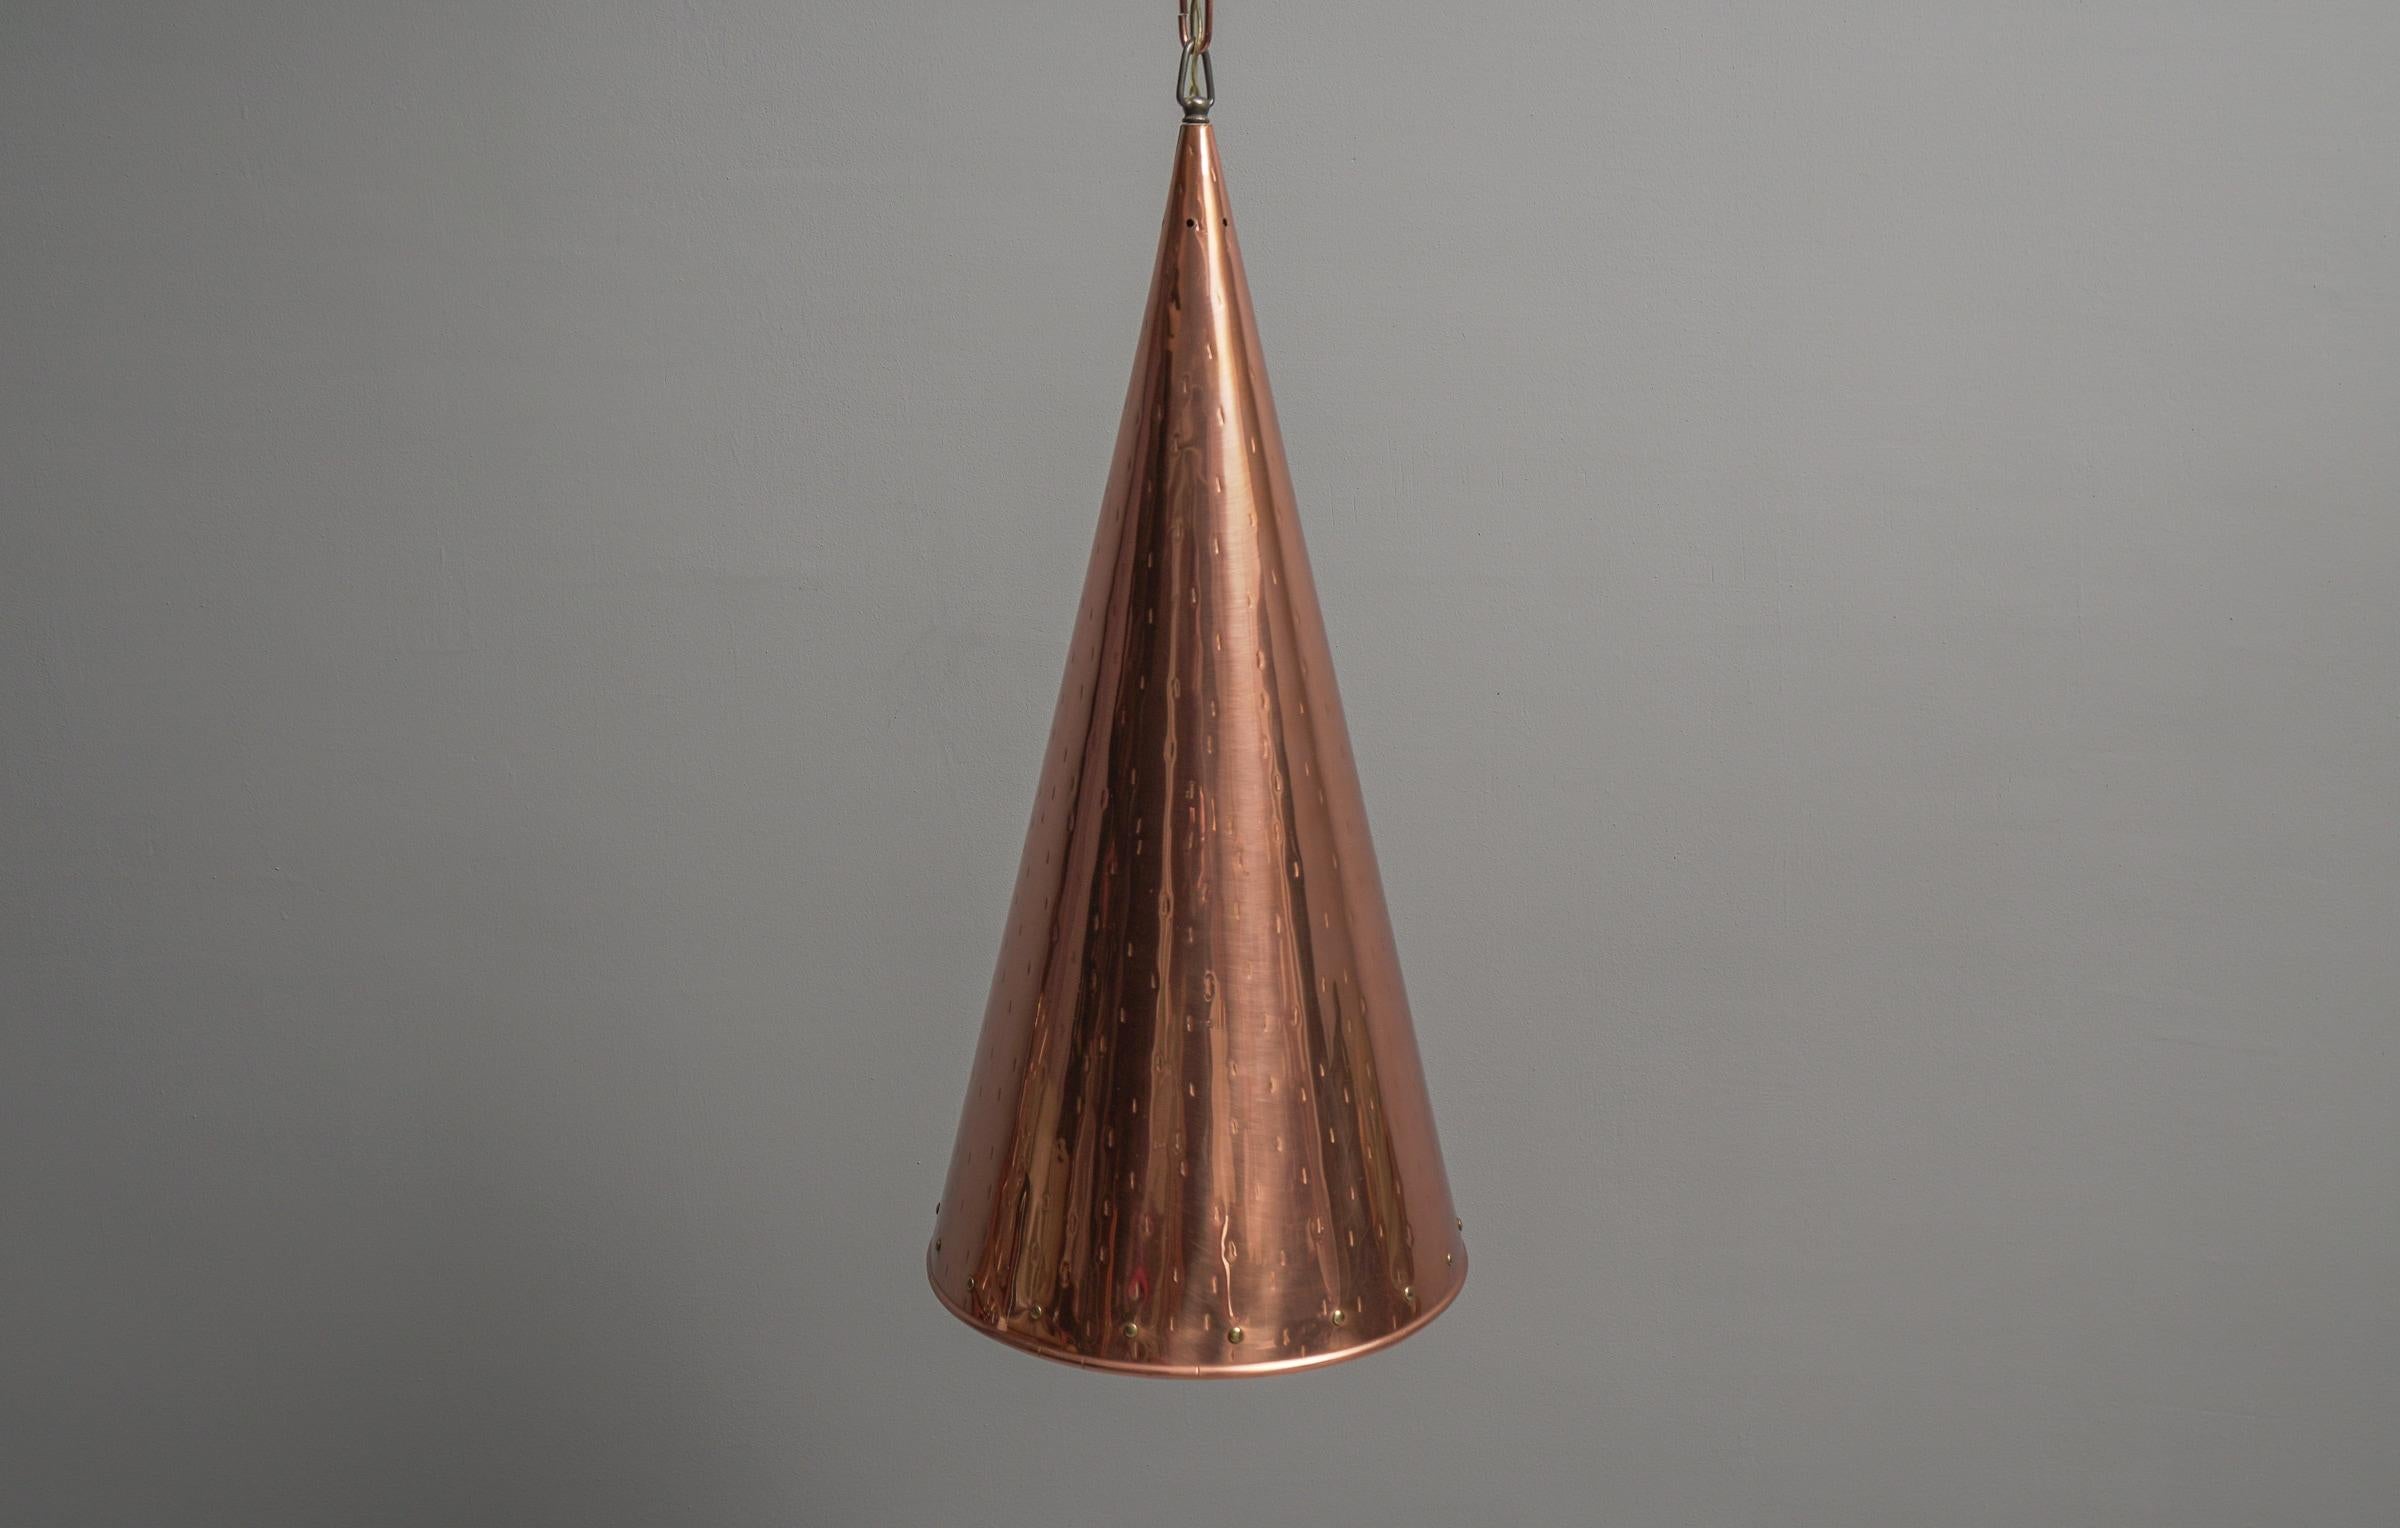 Hammered Copper Cone Pendant Lamps by E.S Horn Aalestrup, 1950s Denmark For Sale 6